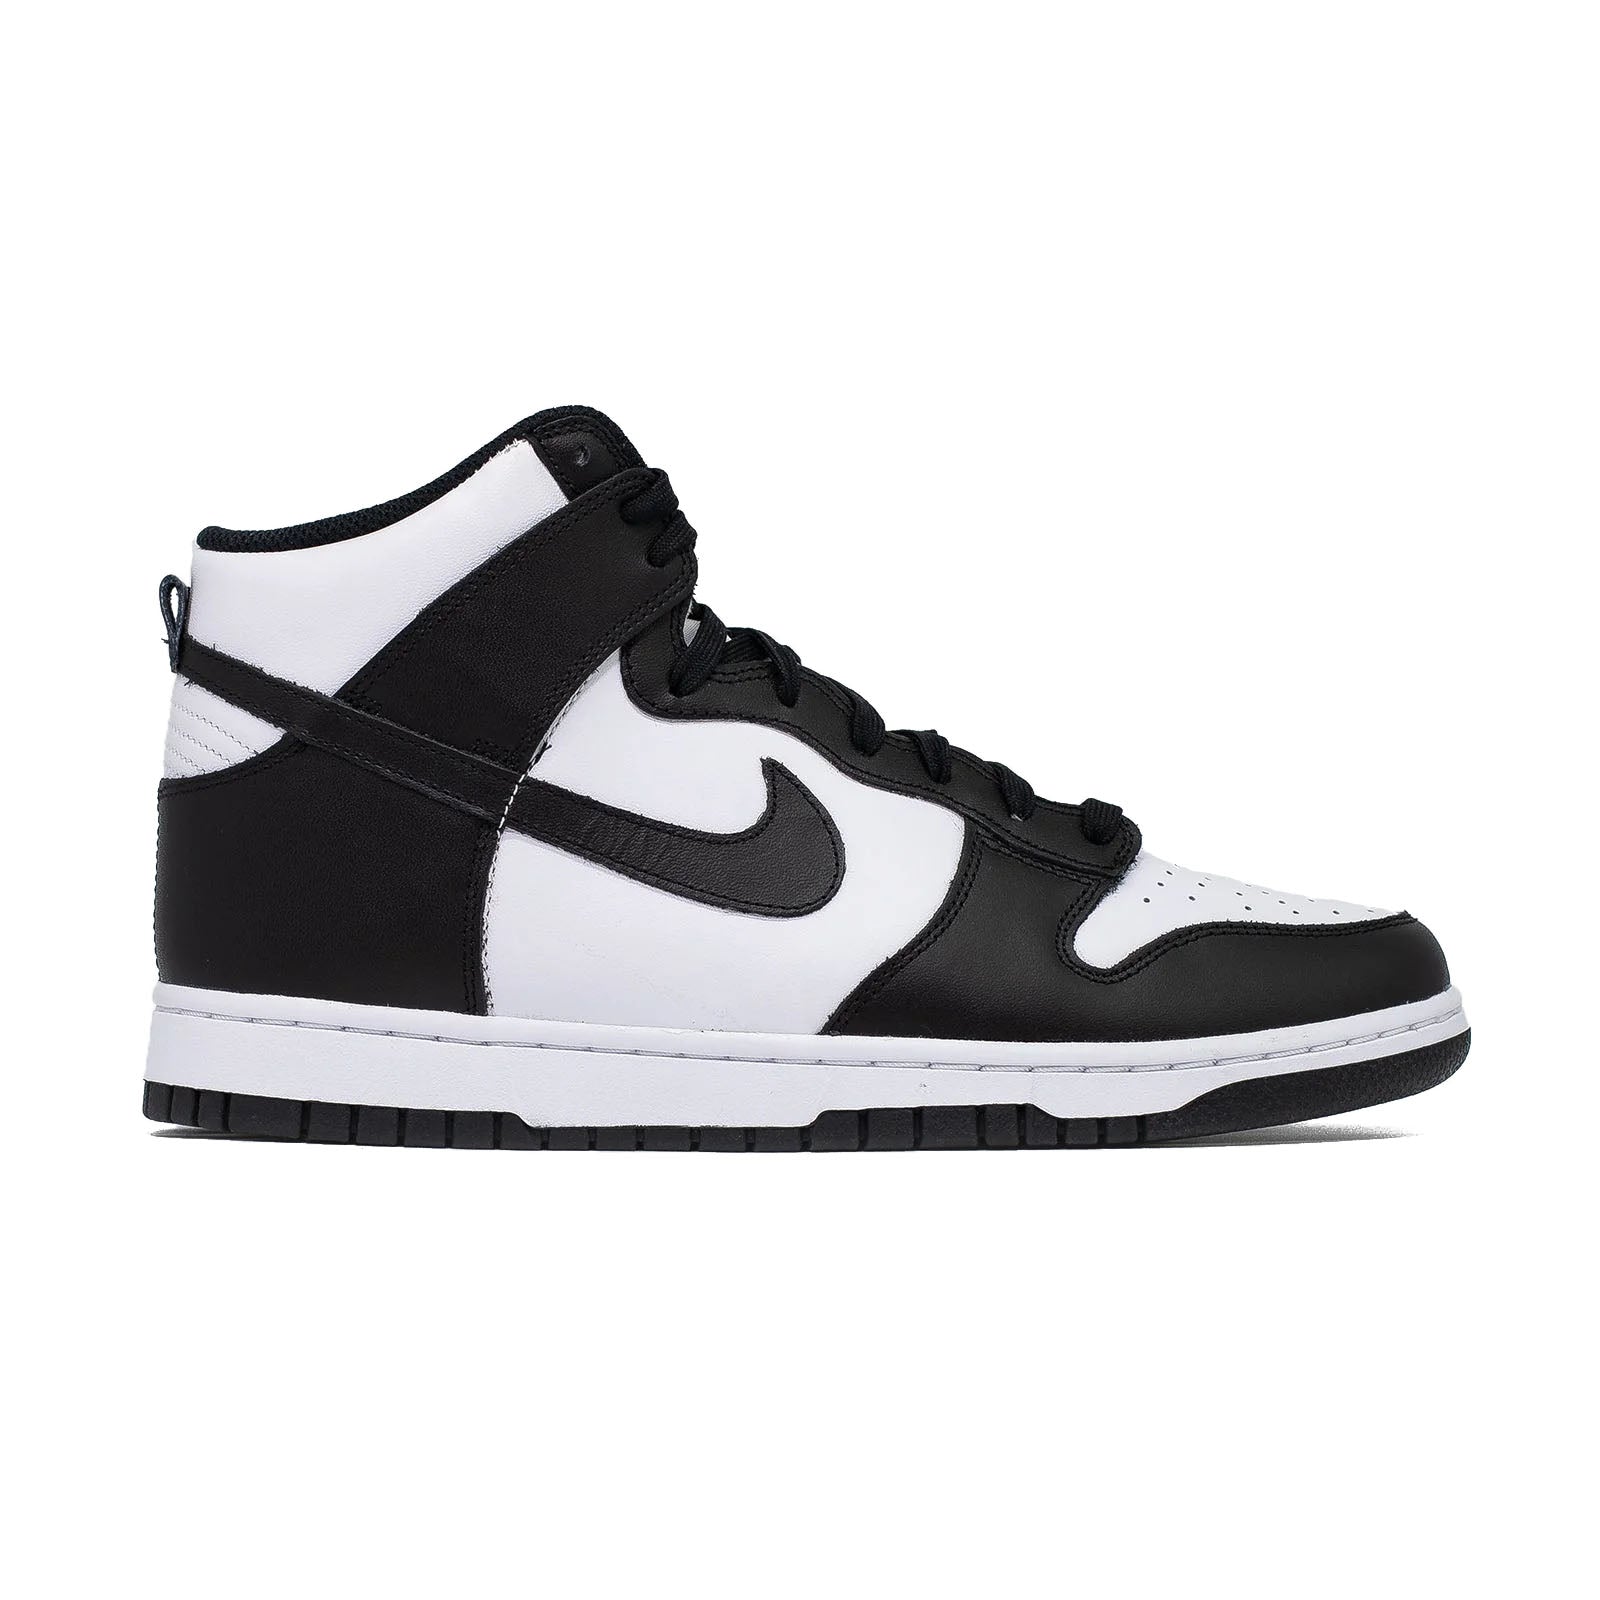 Nike embroidered dunk High (GS), Black White (2021)